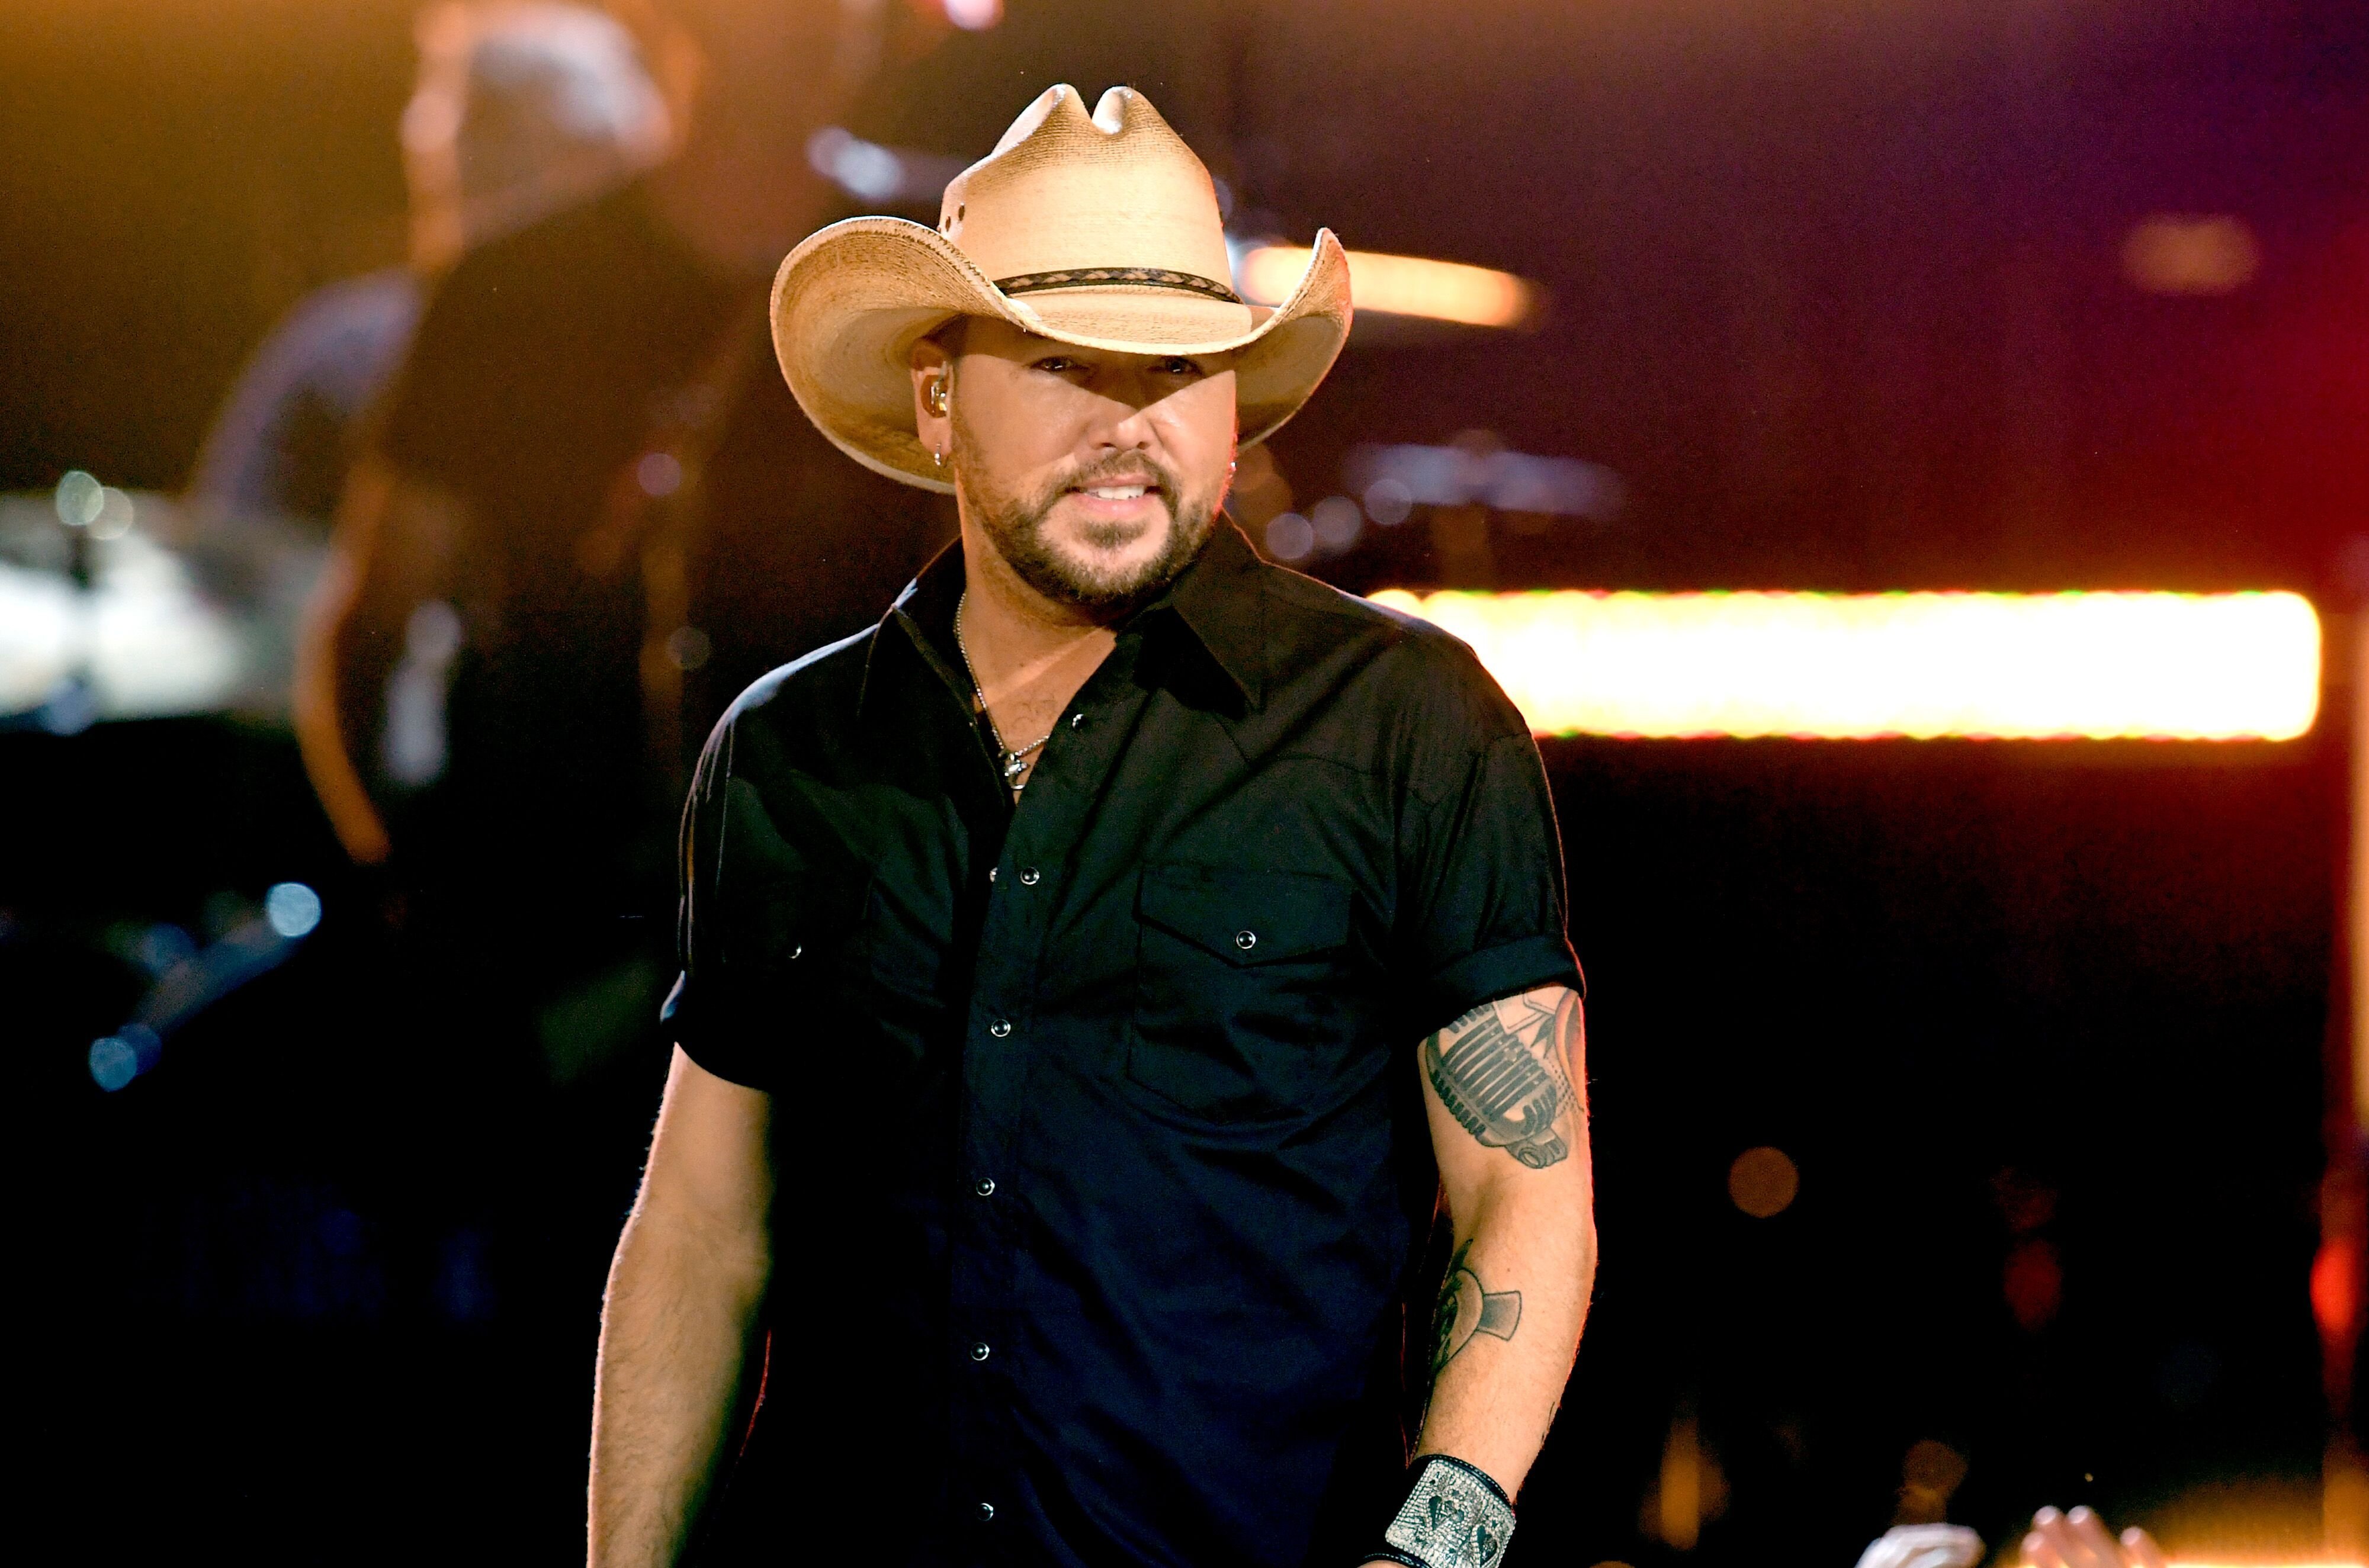 Jason Aldean performs onstage during the 54th Academy Of Country Music Awards on April 07, 2019, in Las Vegas, Nevada | Photo: Kevin Winter/Getty Images